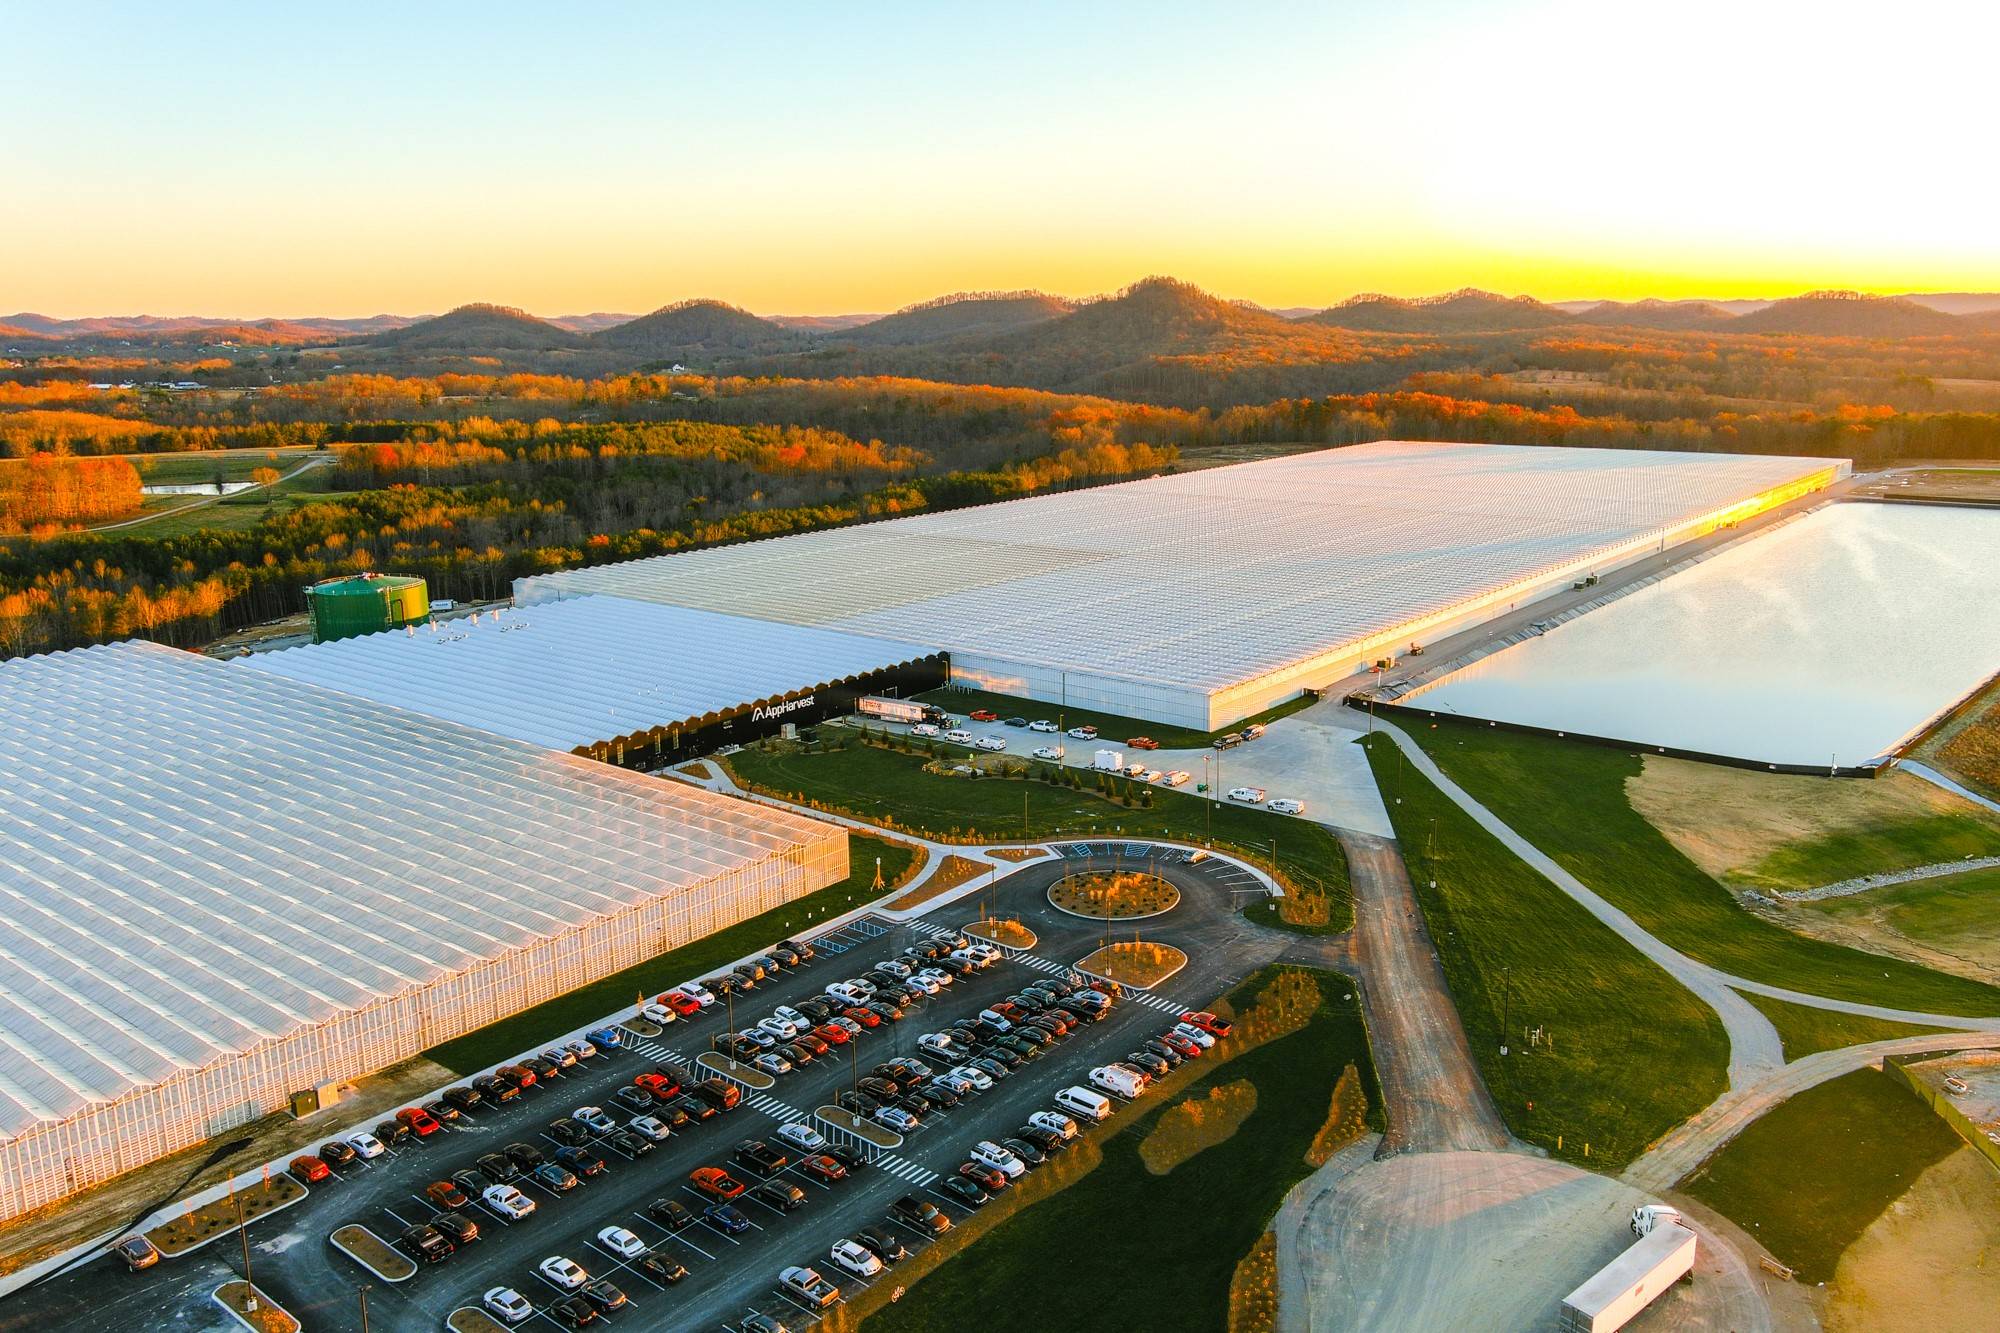 AppHarvest Opens One of the World’s Largest High-Tech Greenhouses in